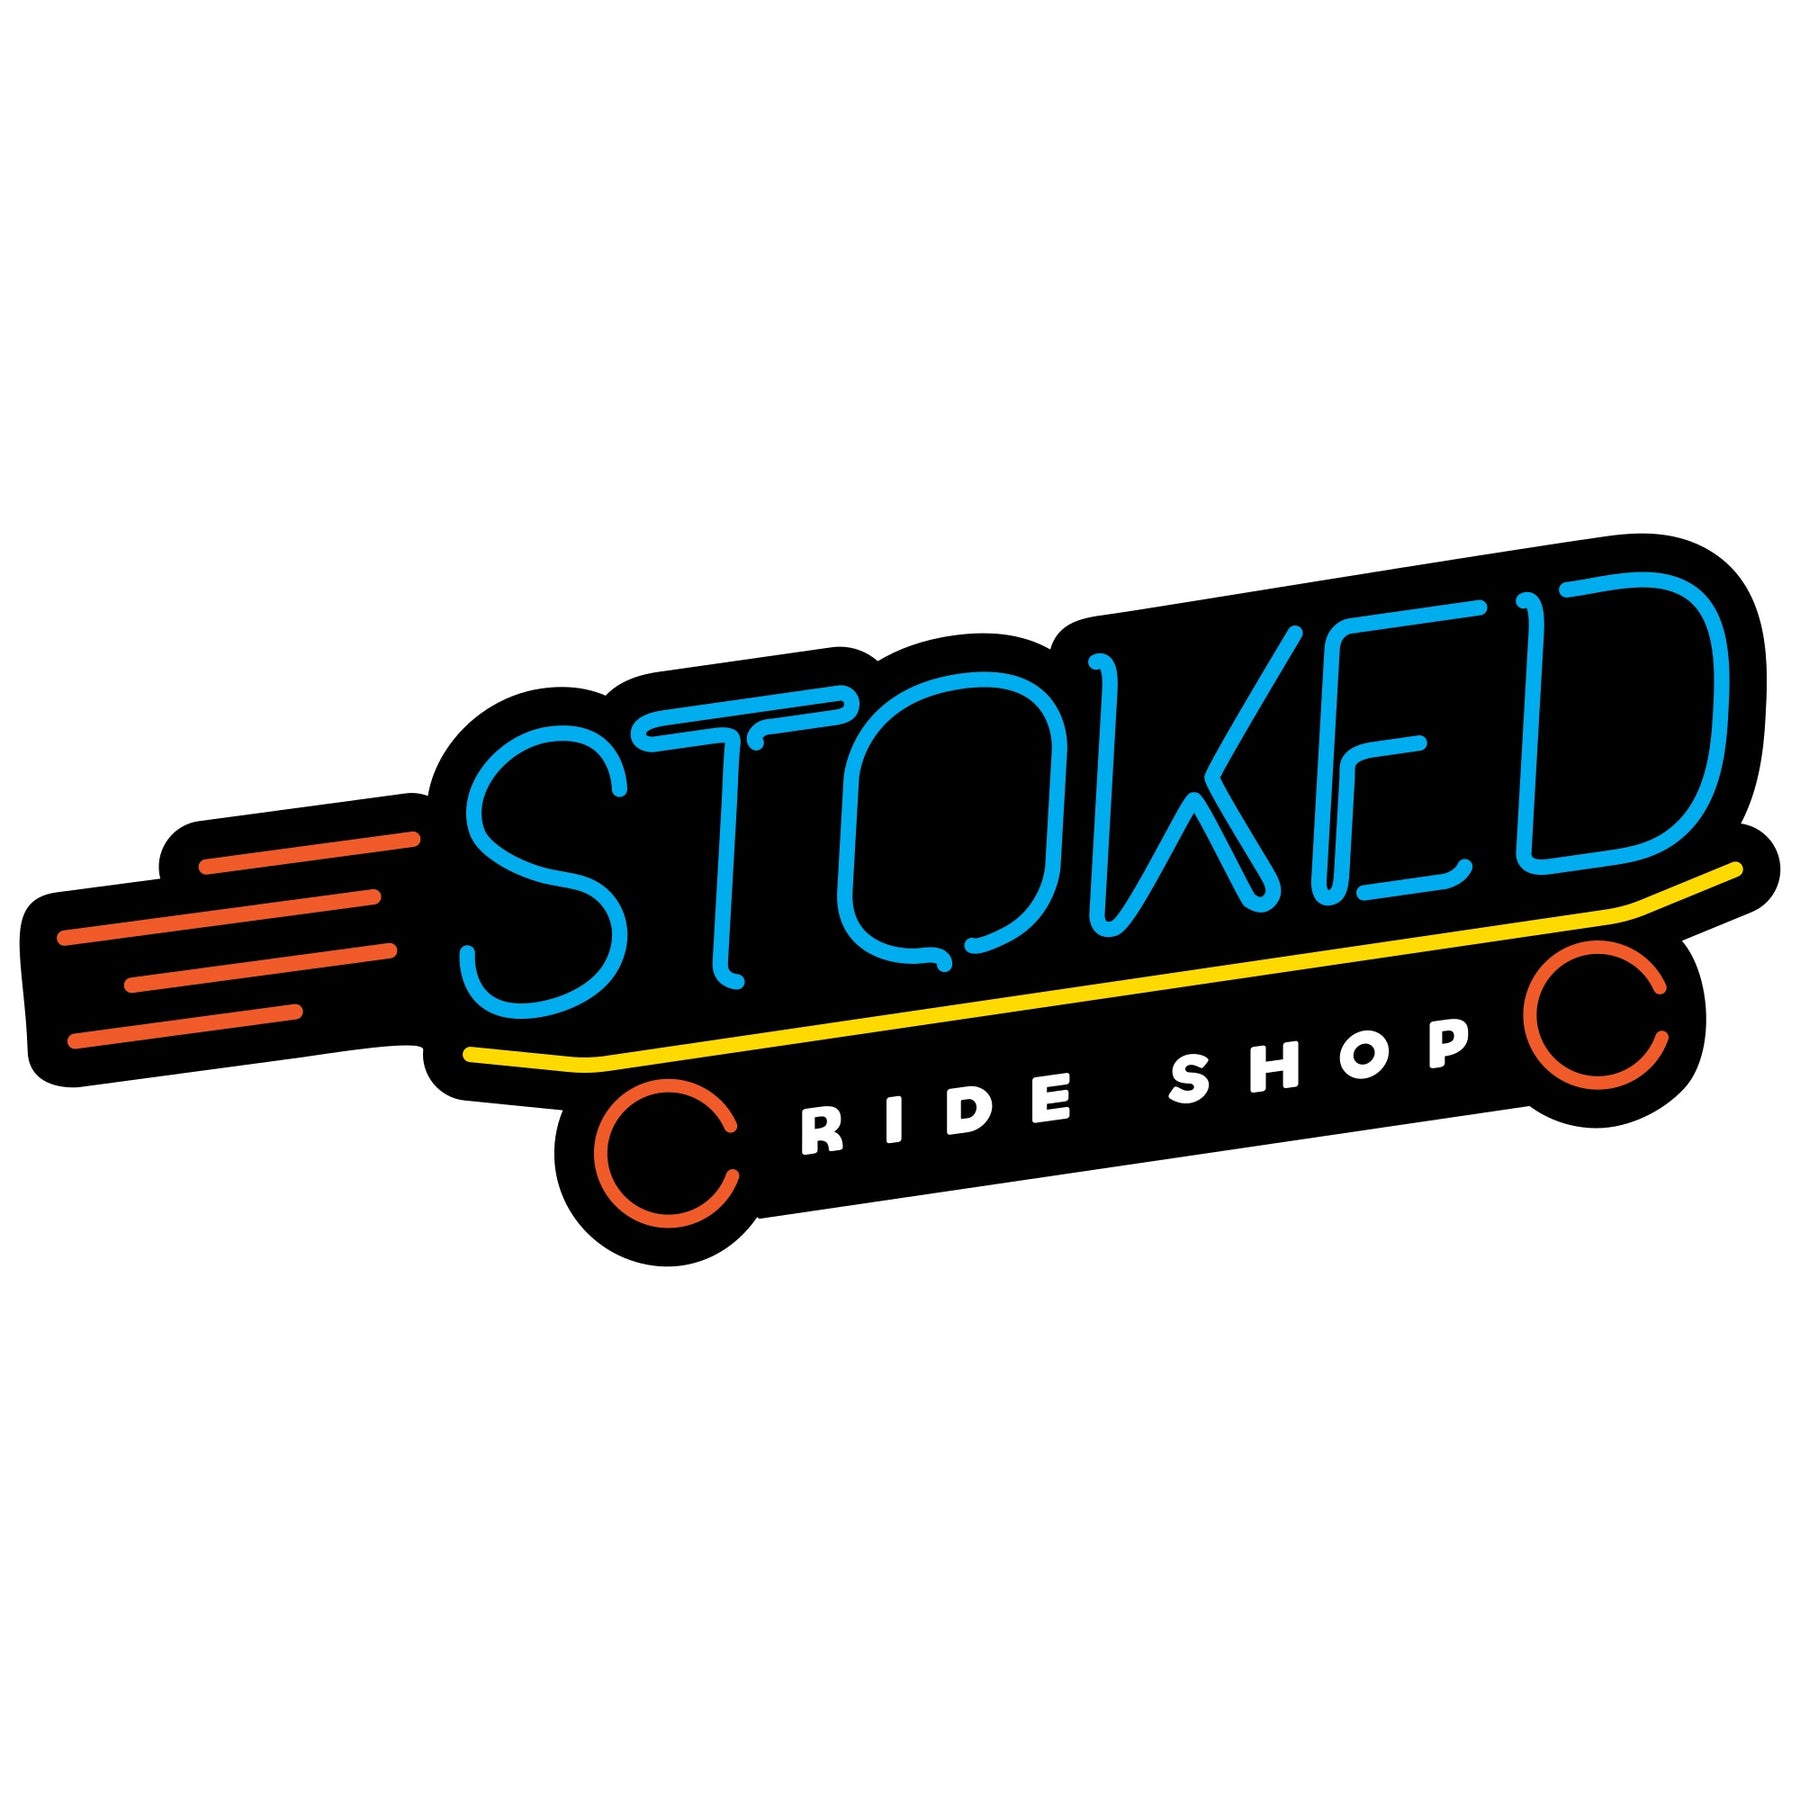 Stoked Ride Shop Neon Sign Sticker